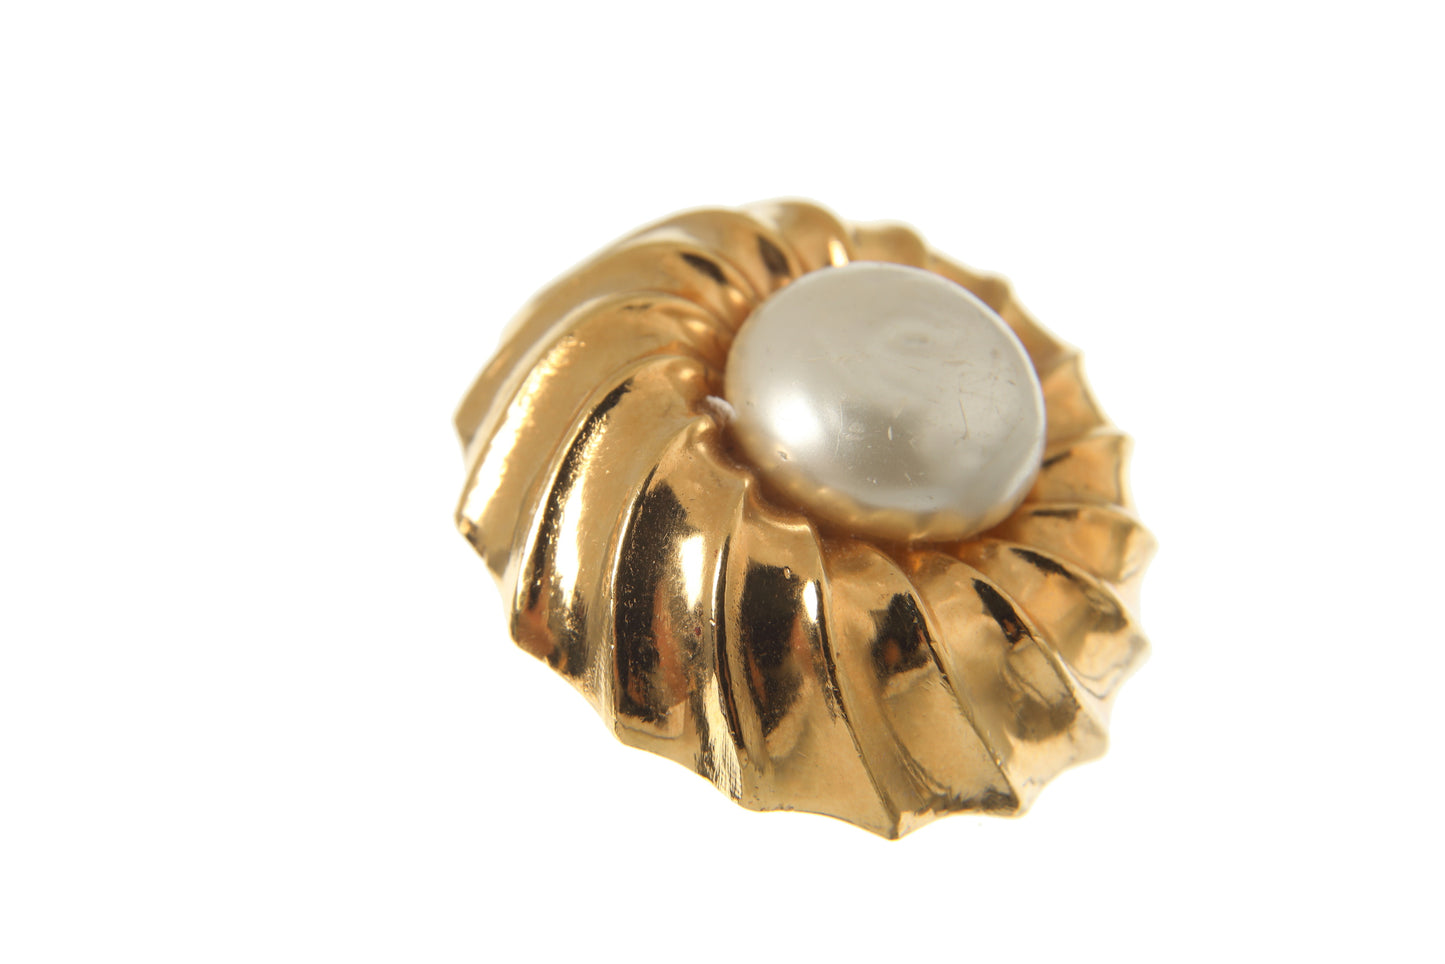 Vintage Chanel pearl and golden metal earrings